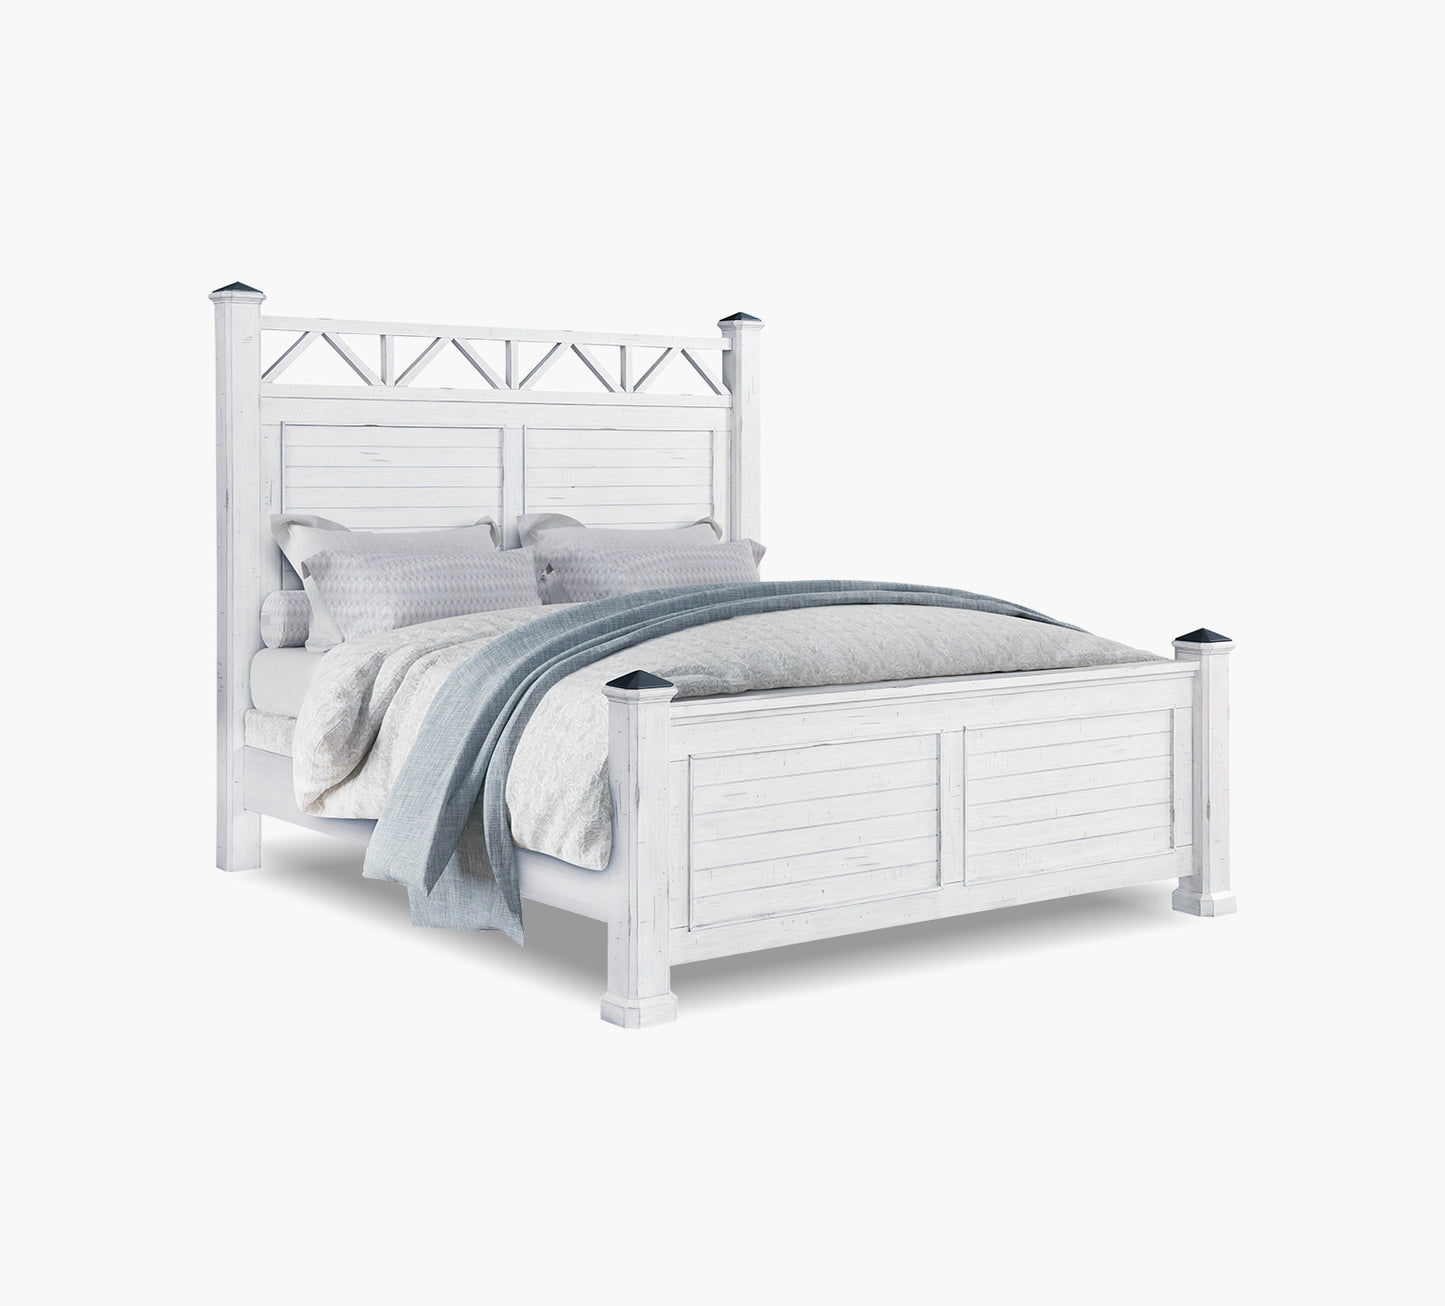 Trina Queen Poster Bed